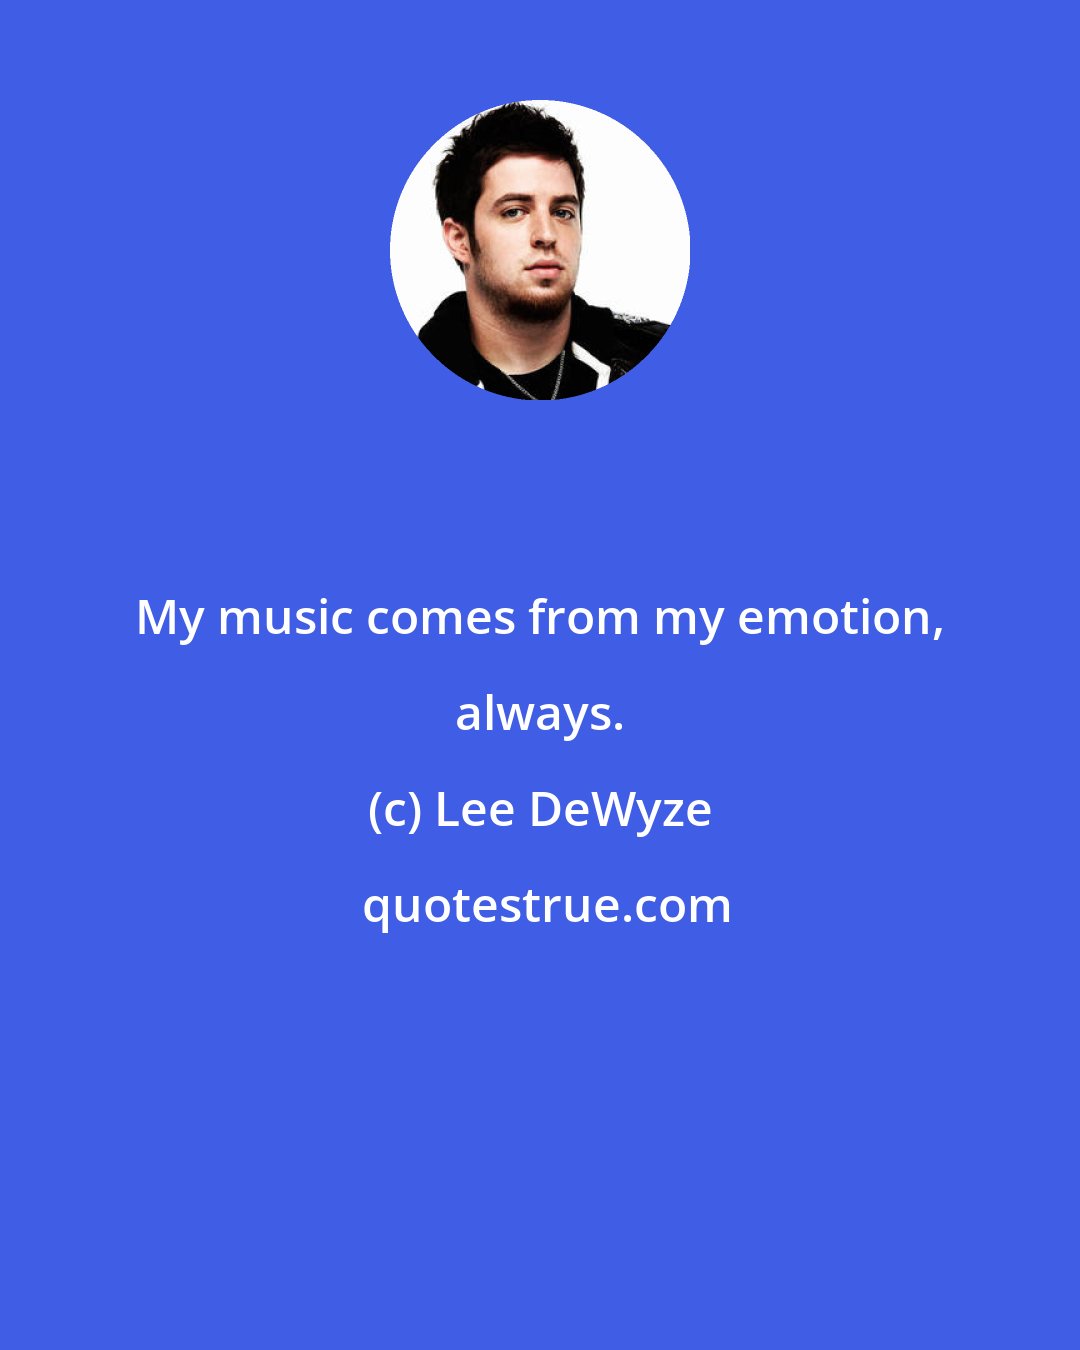 Lee DeWyze: My music comes from my emotion, always.